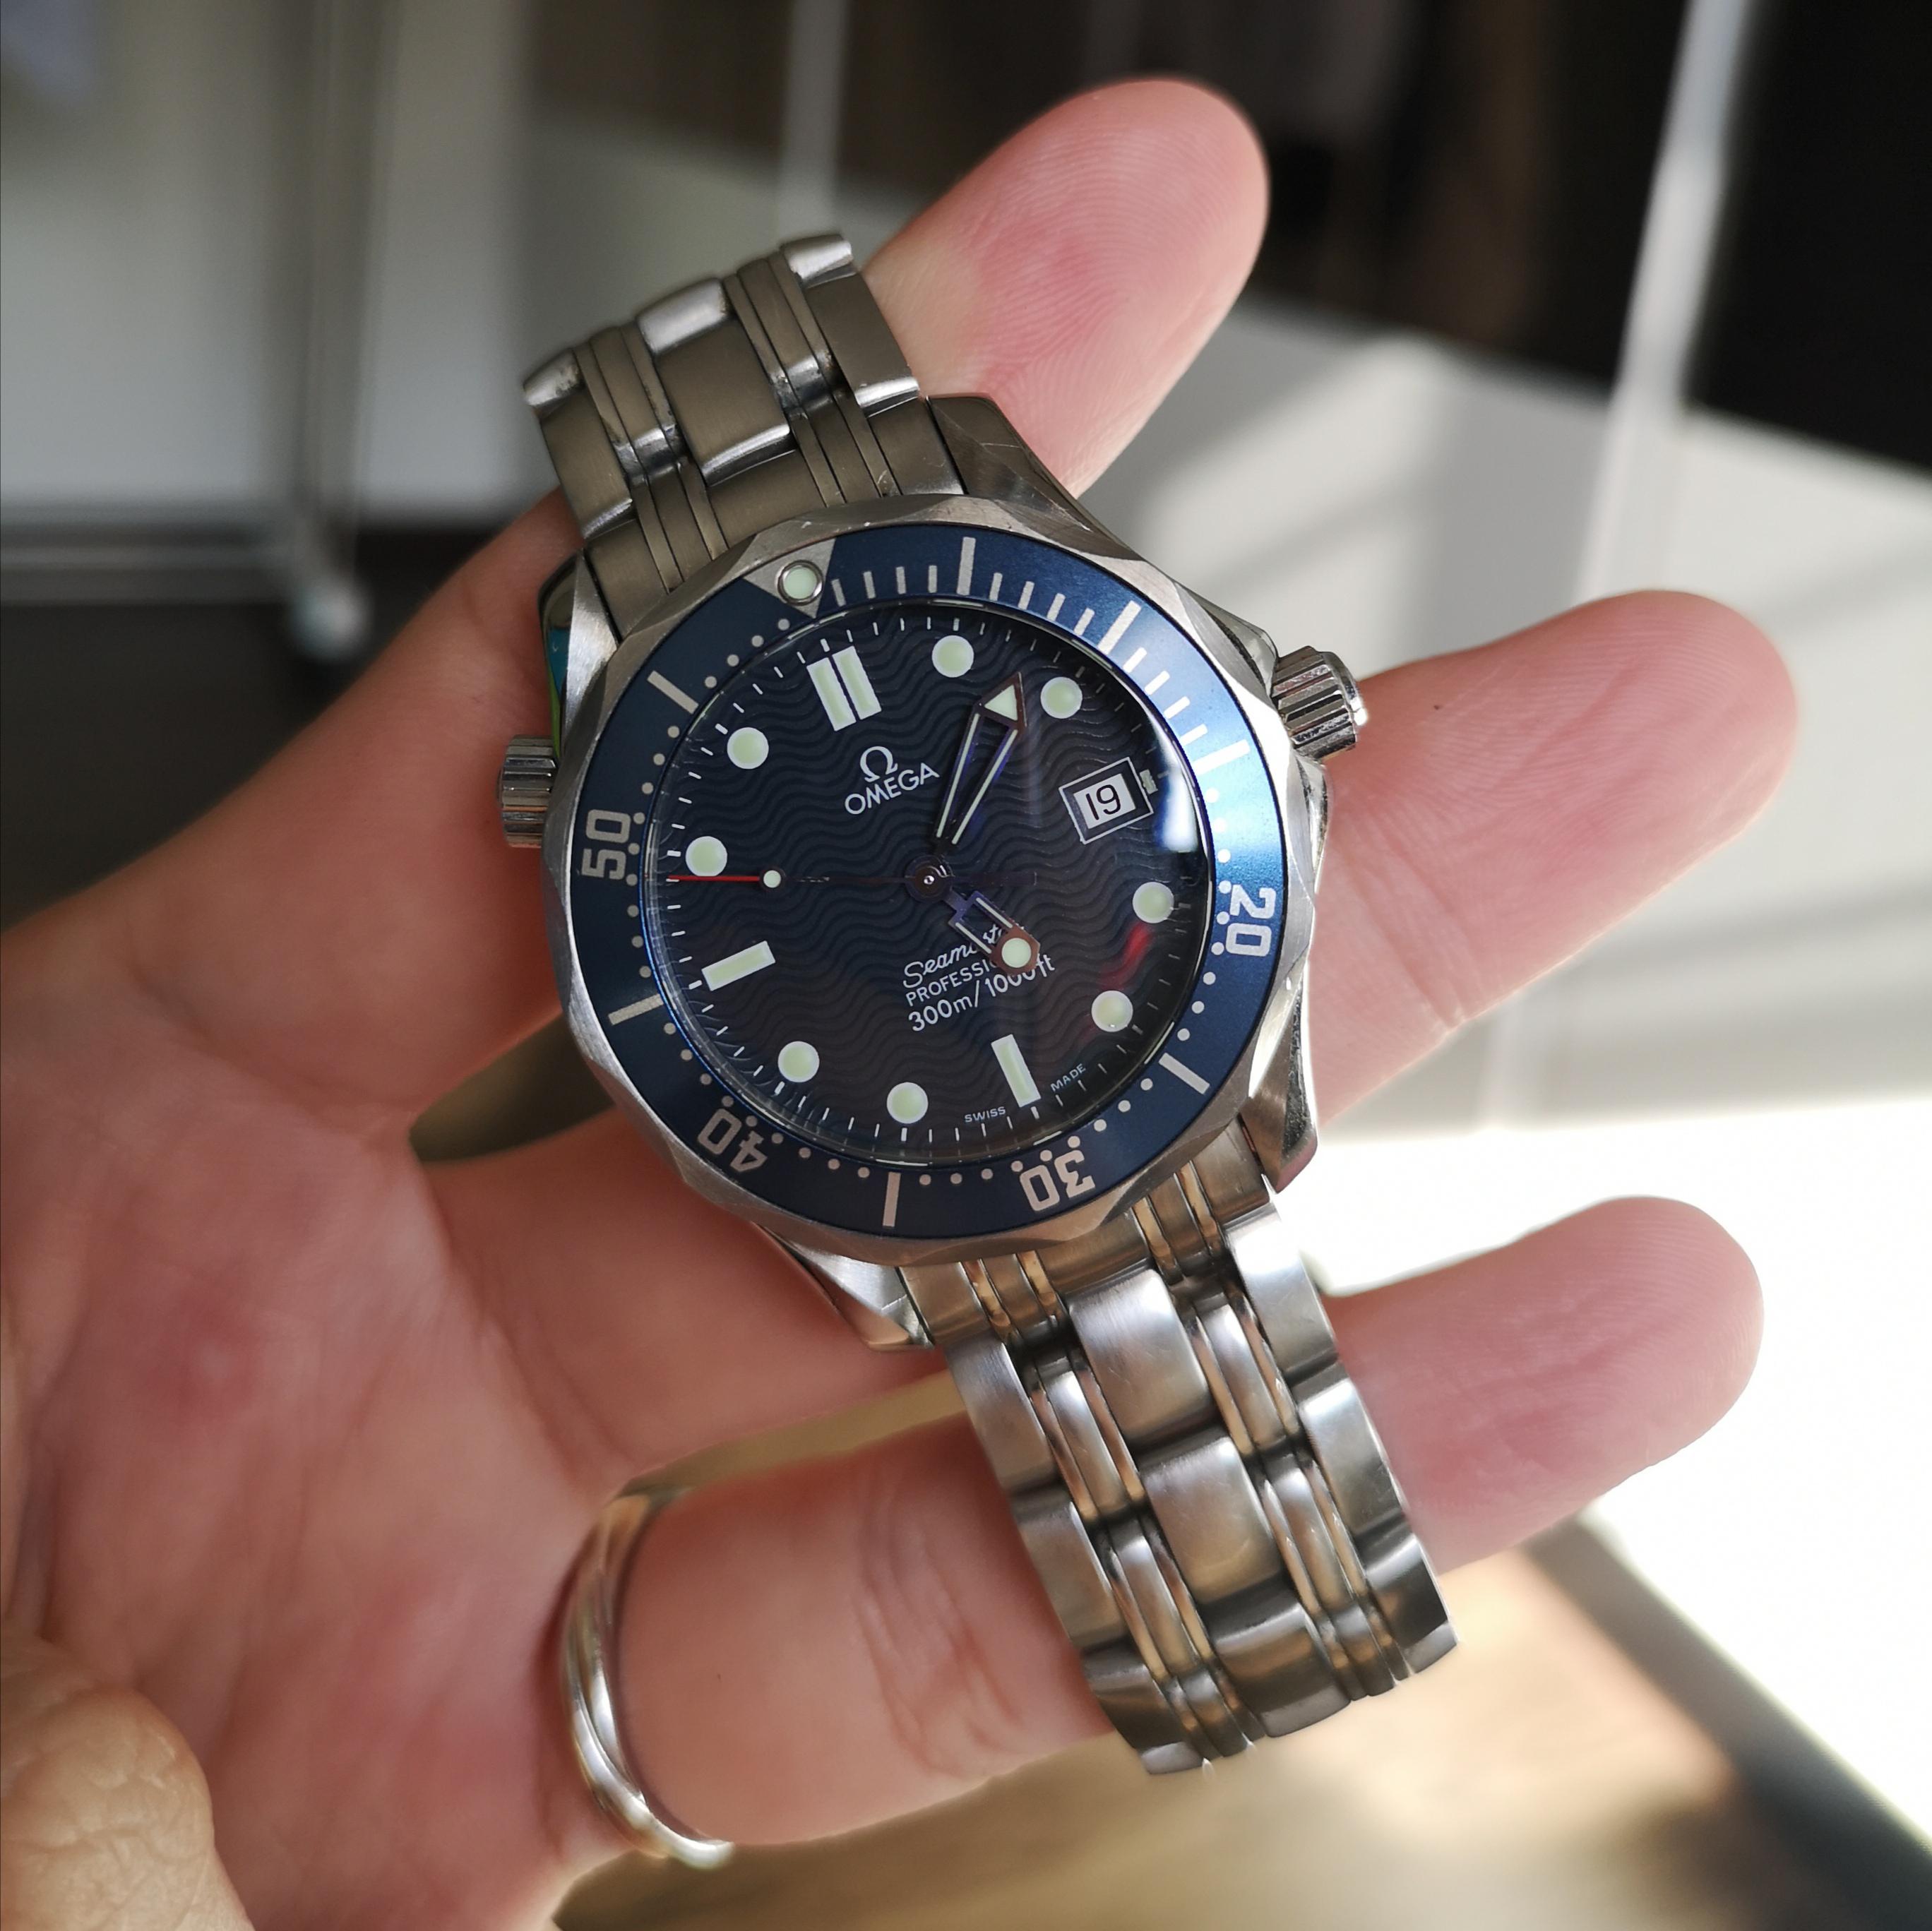 REDUCED] [WTS] Omega seamaster midsize 